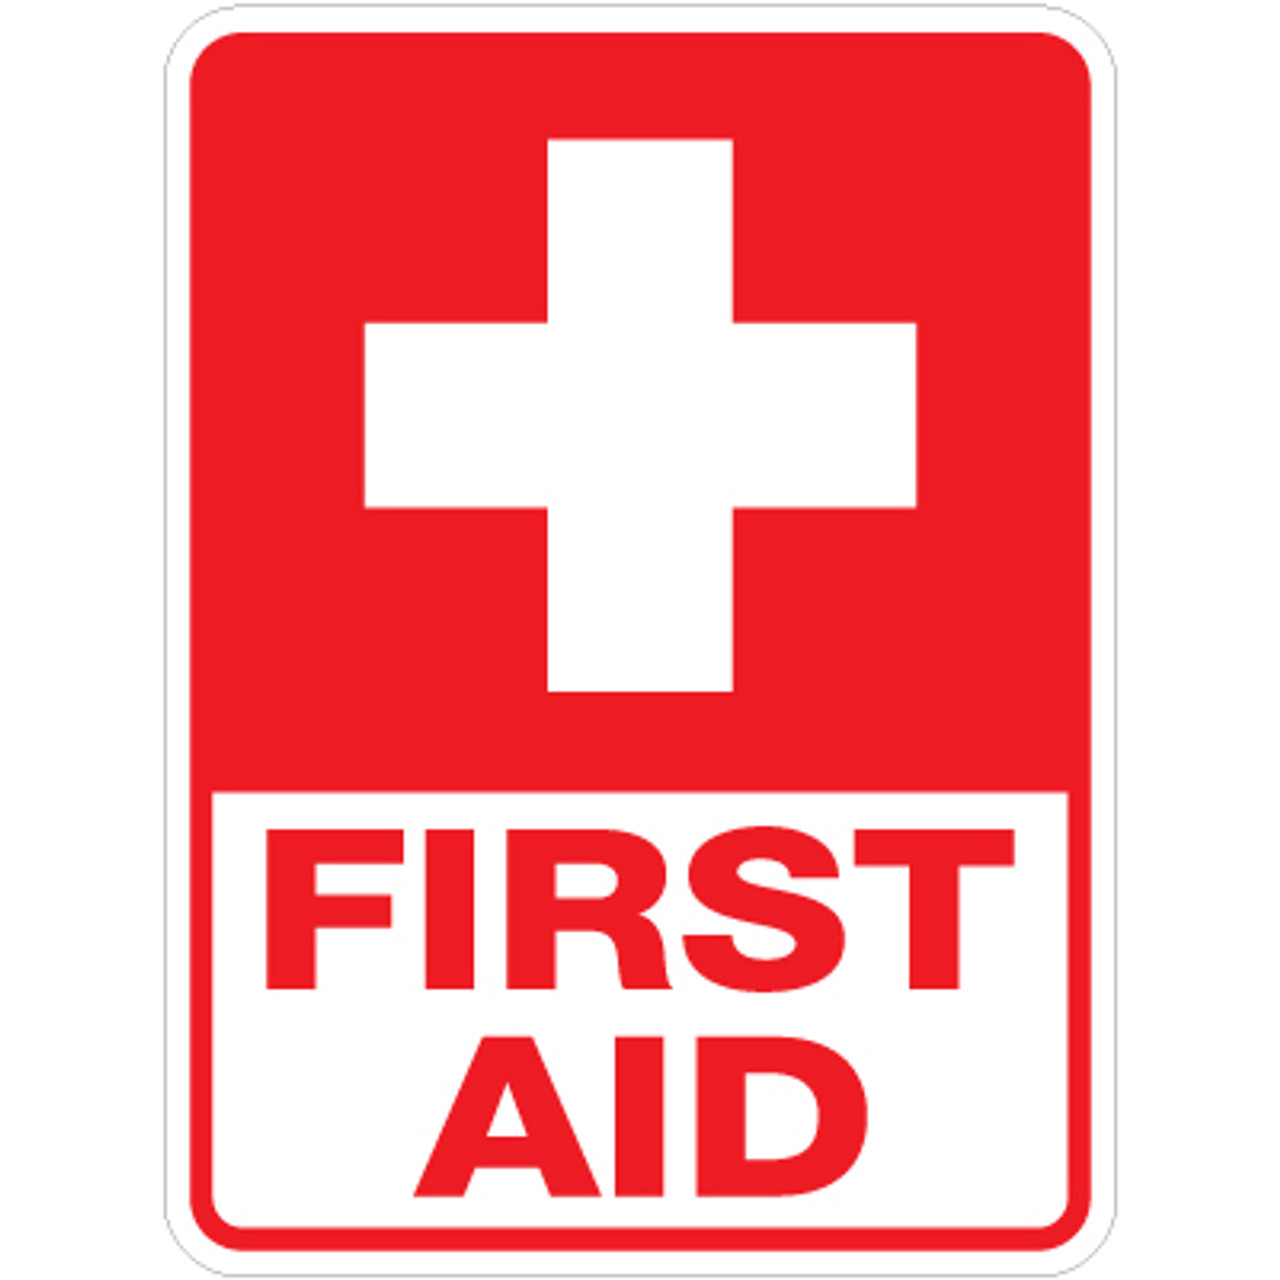 First Aid Sign Meaning